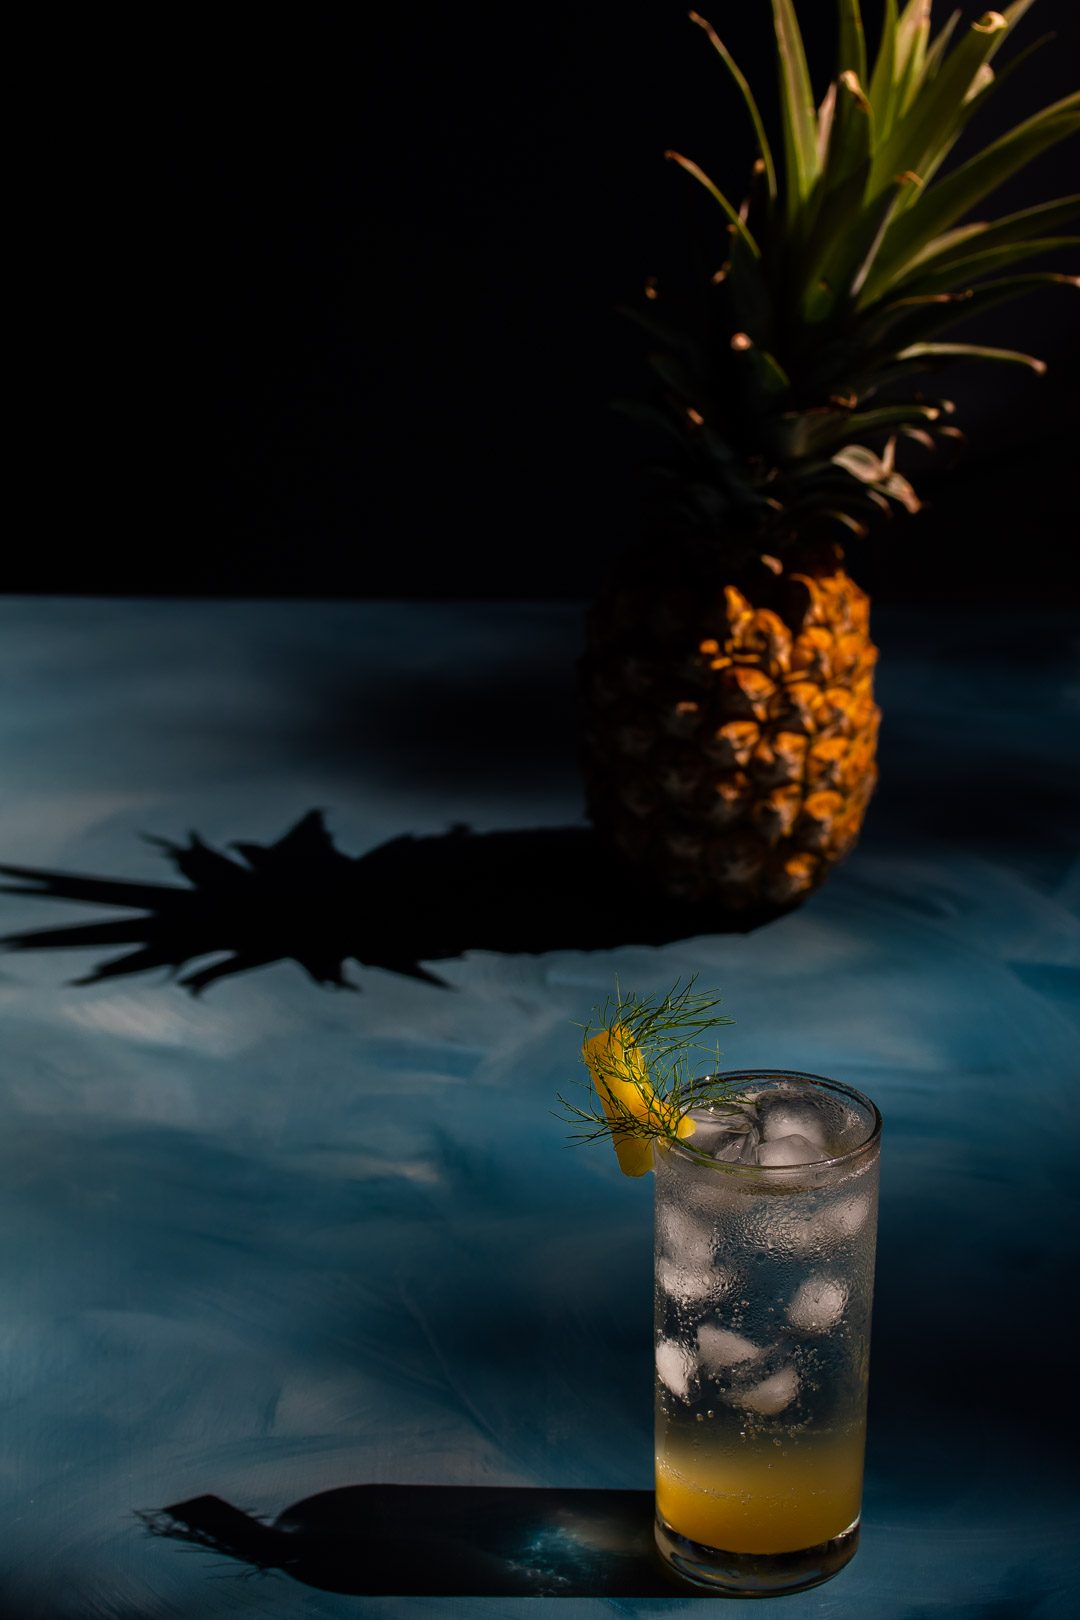 pineapple fennel shrub syrup from 45 degrees with pineapple and shadow in background